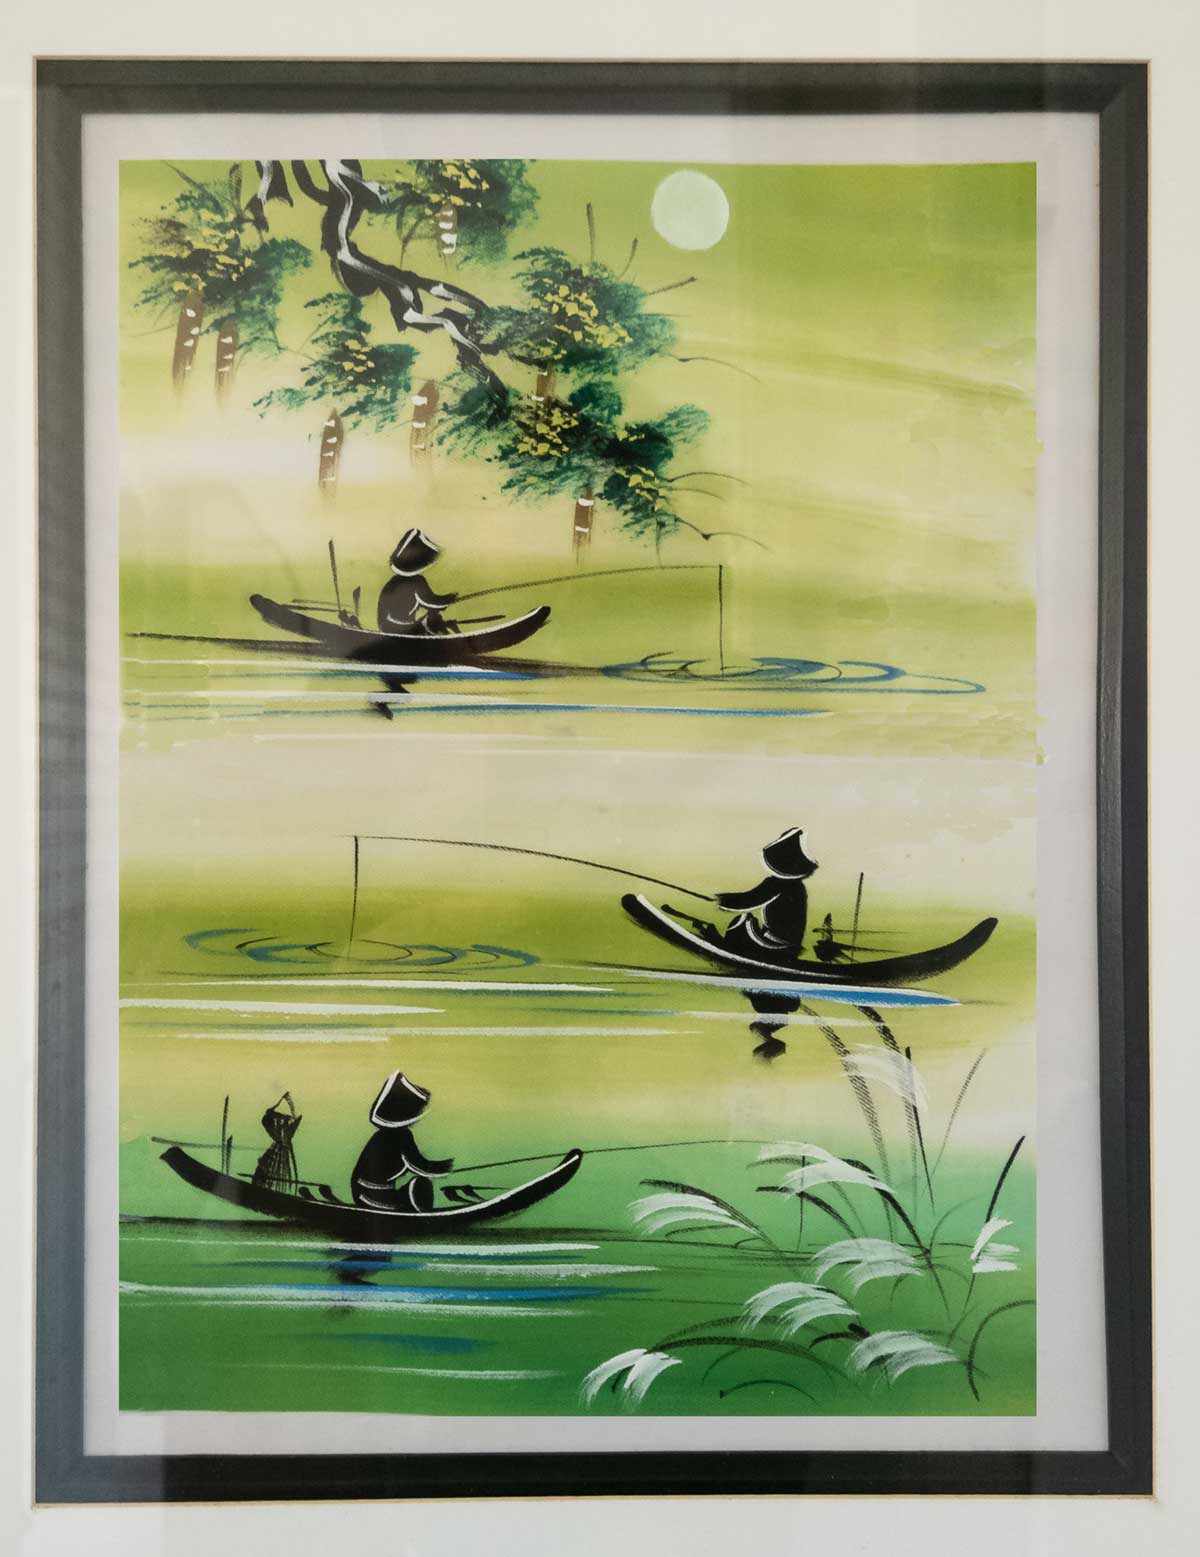 One of the Rice Paper paintings we purchased in Vietnam